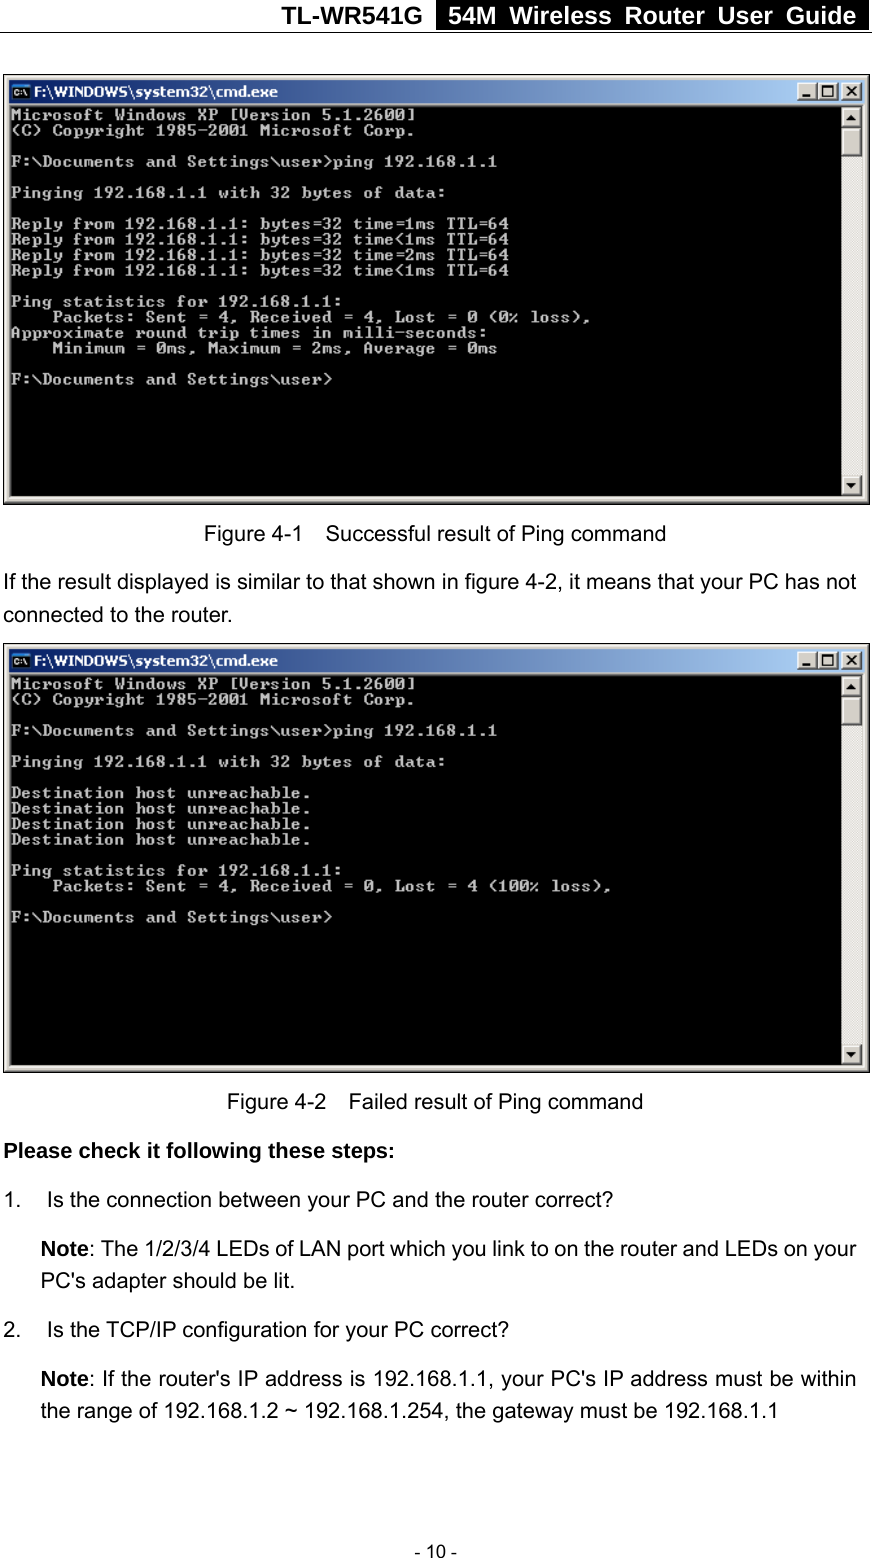 TL-WR541G   54M Wireless Router User Guide    Figure 4-1    Successful result of Ping command If the result displayed is similar to that shown in figure 4-2, it means that your PC has not connected to the router.     Figure 4-2    Failed result of Ping command Please check it following these steps: 1.  Is the connection between your PC and the router correct? Note: The 1/2/3/4 LEDs of LAN port which you link to on the router and LEDs on your PC&apos;s adapter should be lit. 2. Is the TCP/IP configuration for your PC correct? Note: If the router&apos;s IP address is 192.168.1.1, your PC&apos;s IP address must be within the range of 192.168.1.2 ~ 192.168.1.254, the gateway must be 192.168.1.1  - 10 - 